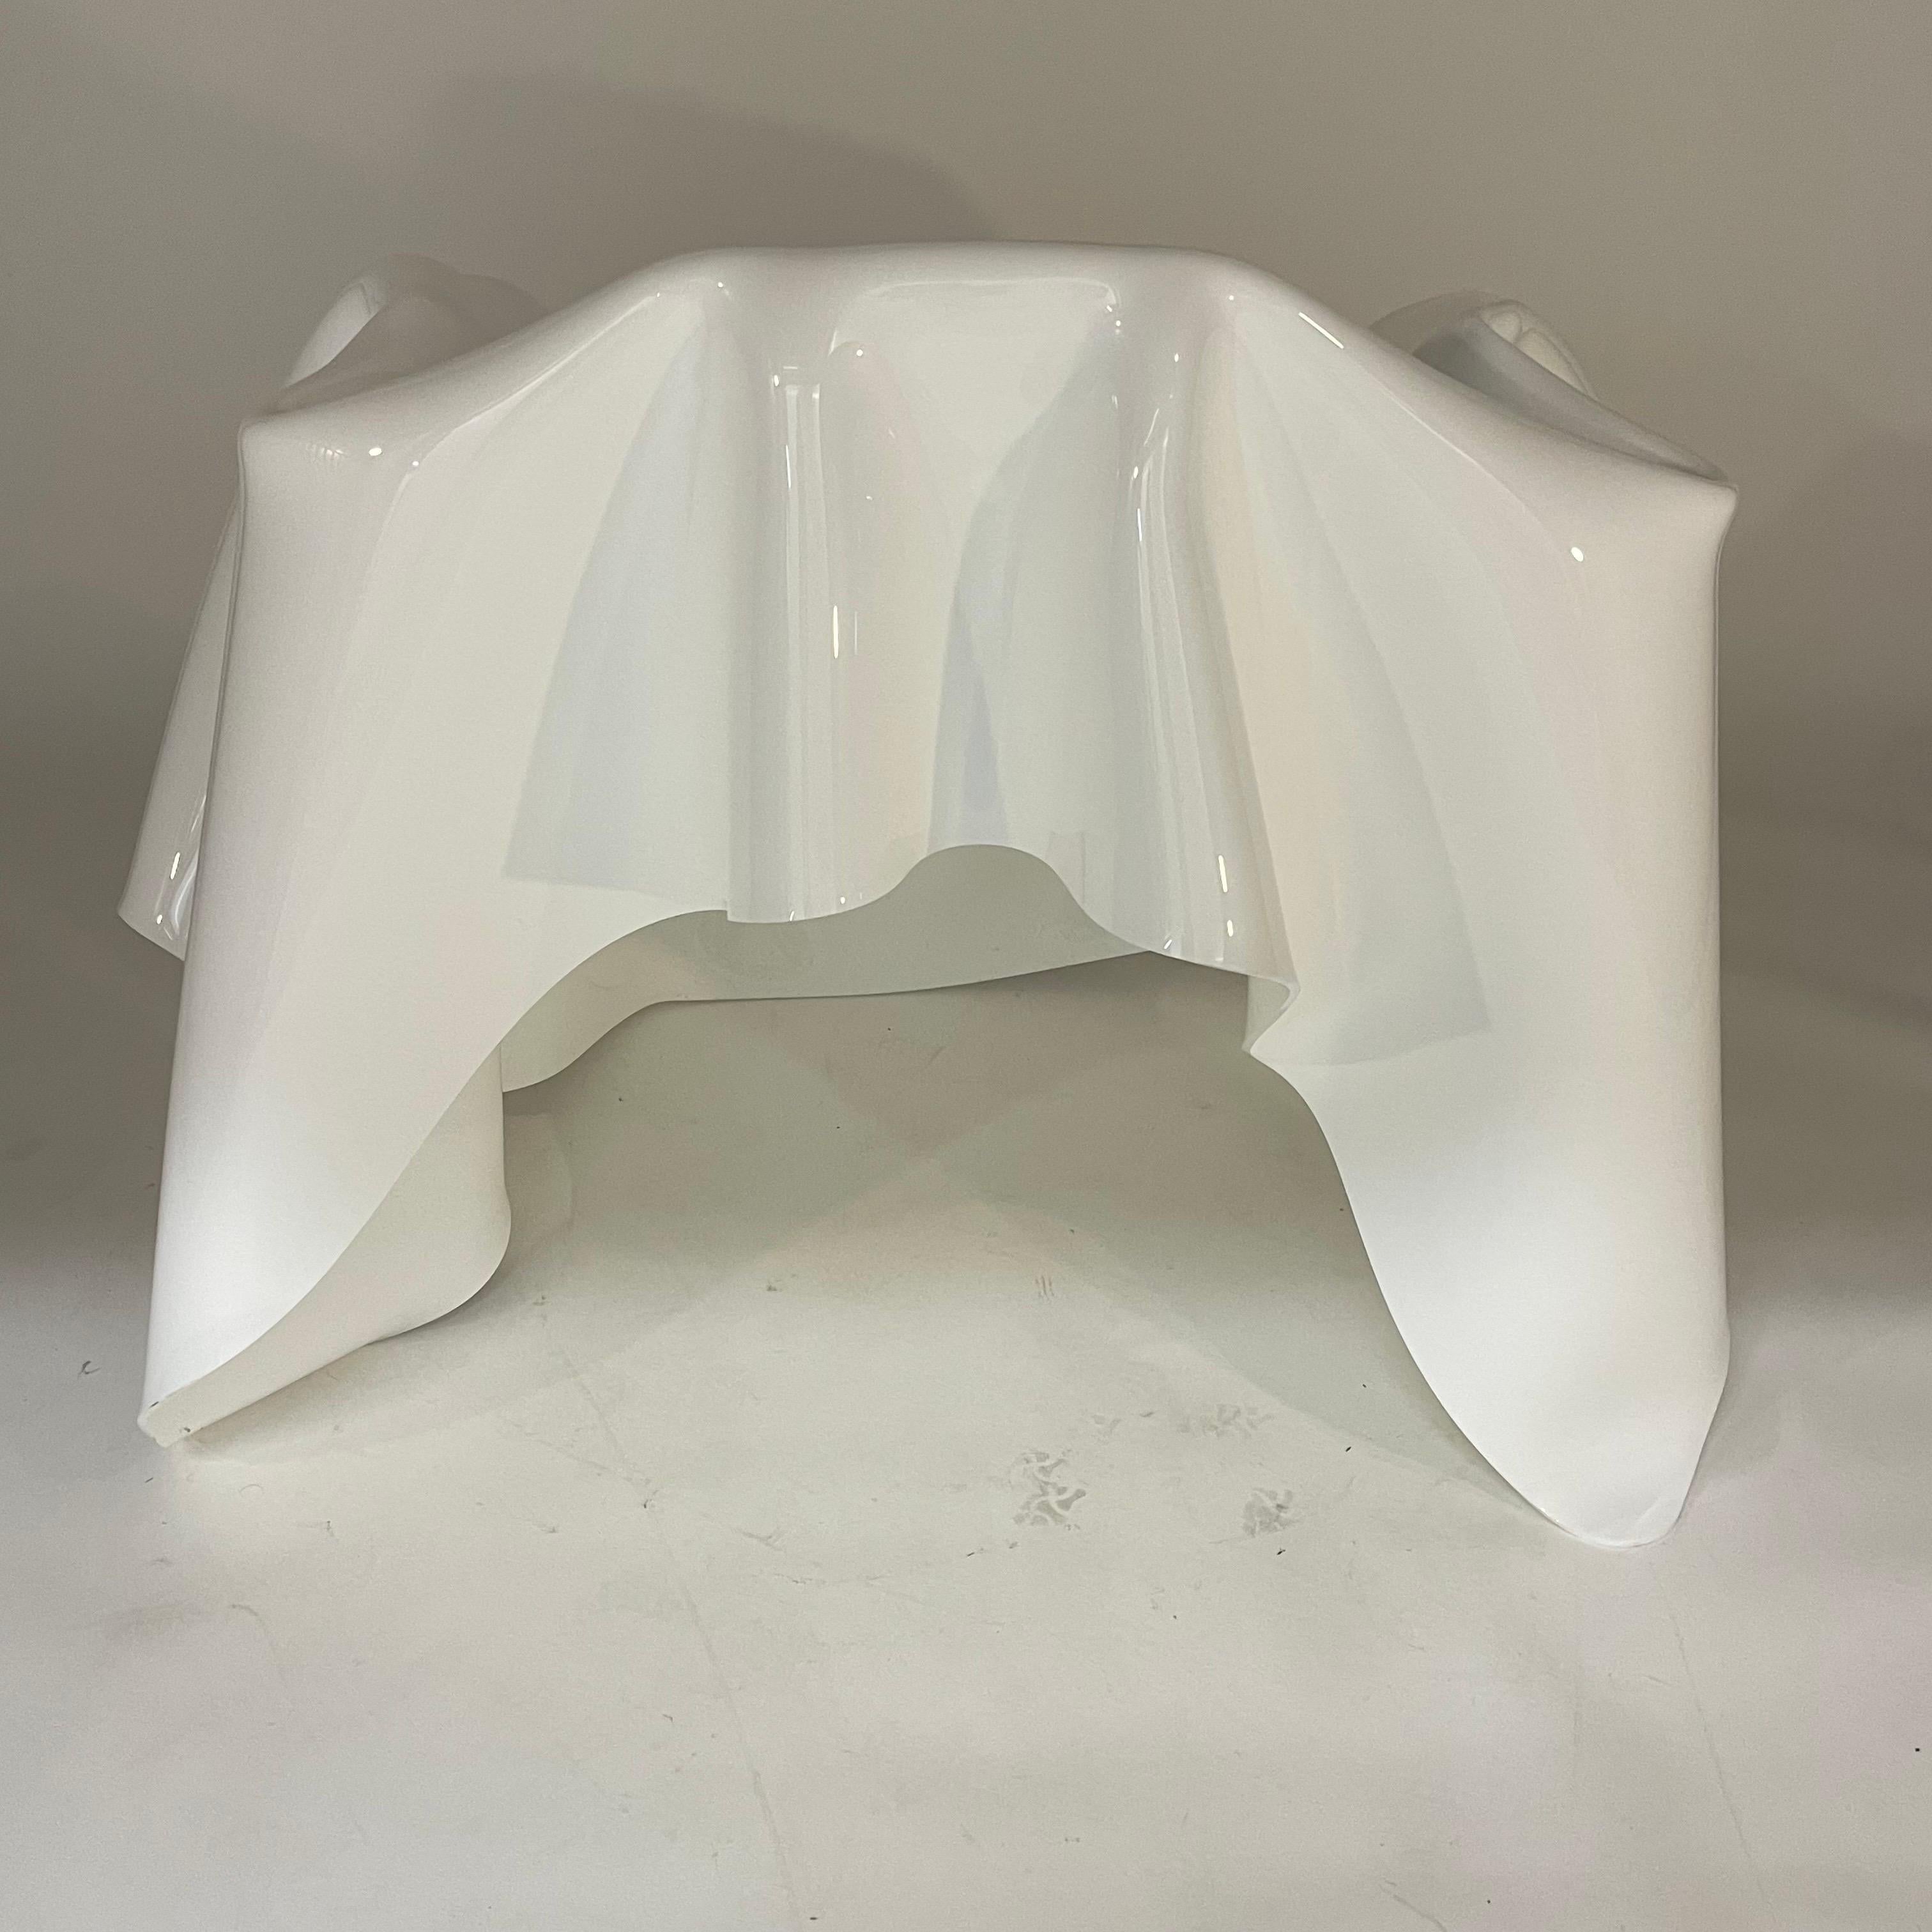 Molded Post Modern White Acrylic Lucite Trompe L'oeil Handkerchief Ghost Chair, 1980s For Sale